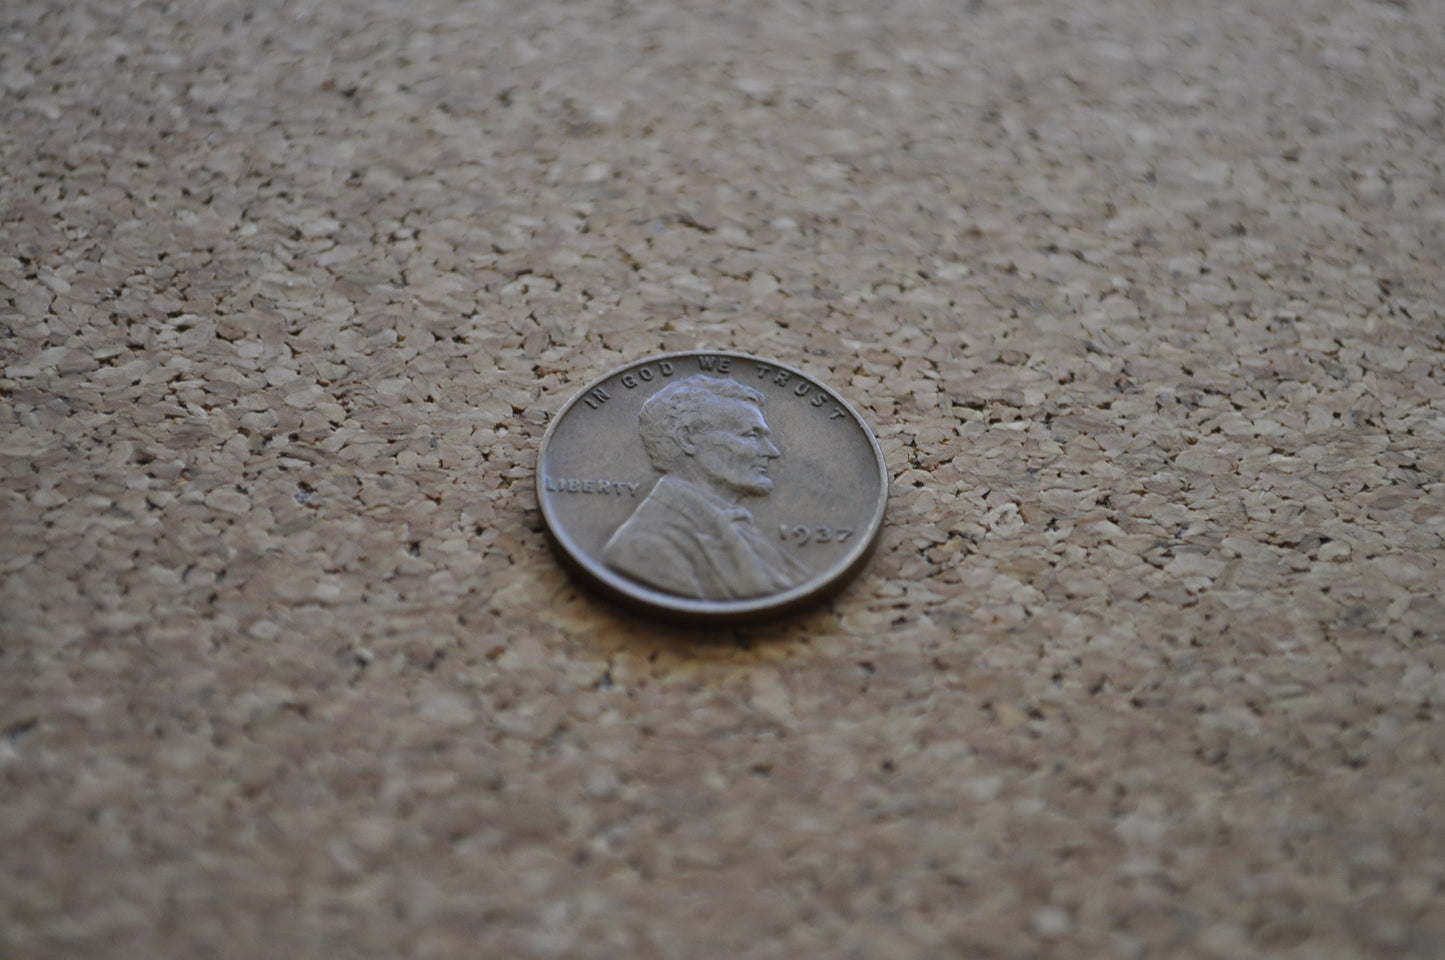 1937 Wheat Penny - EF (Extra Fine) Condition